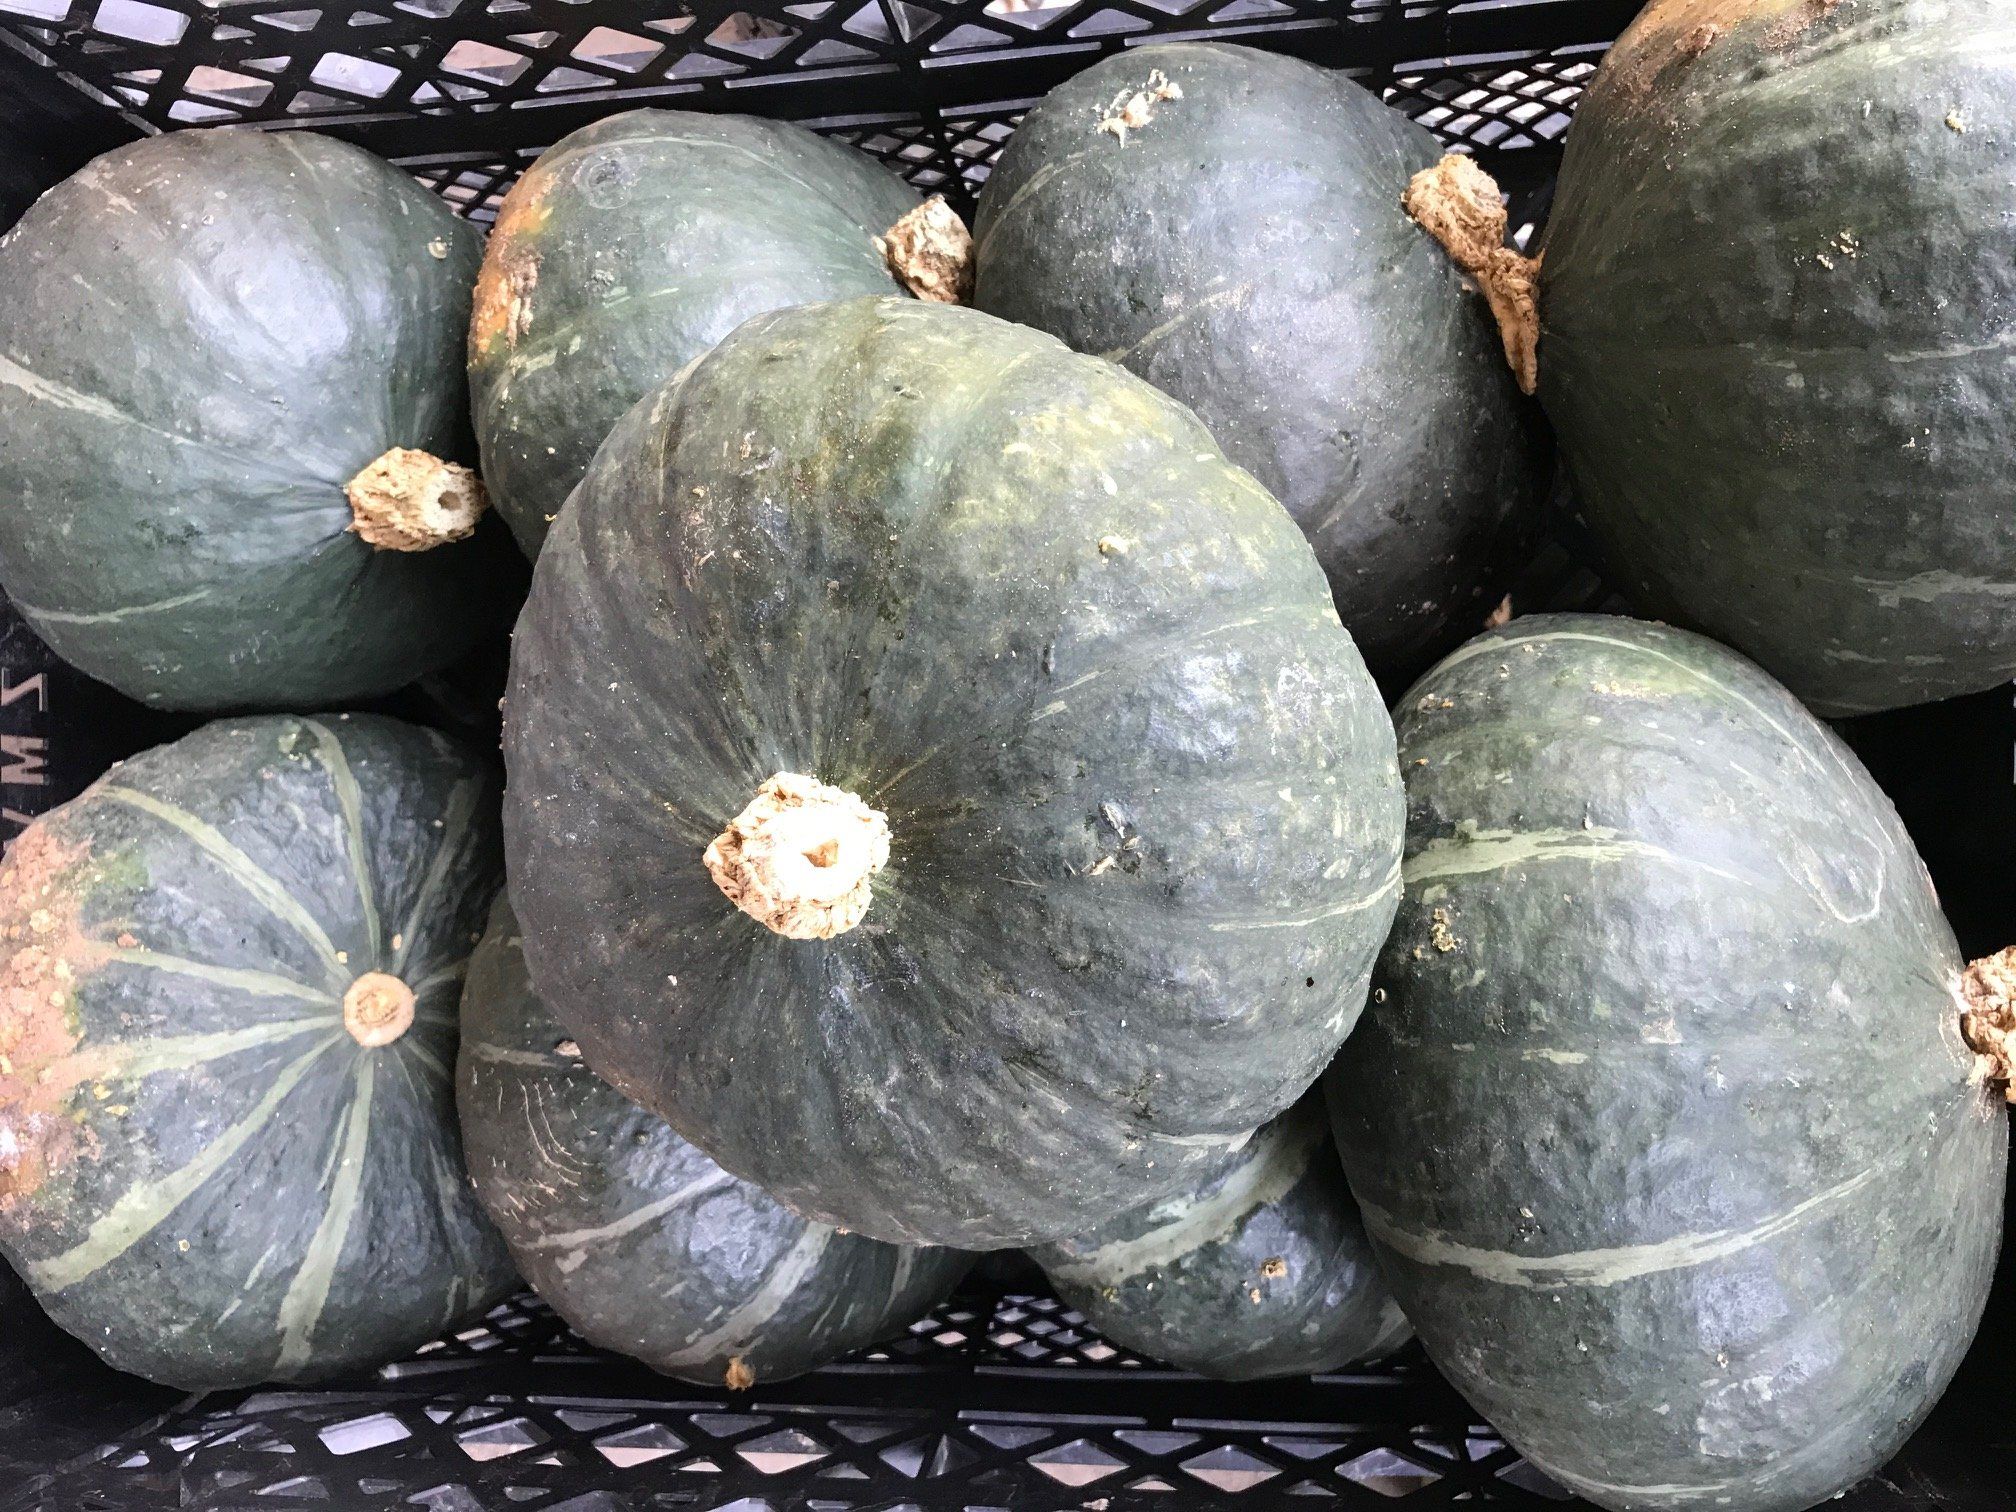 Farm Happenings for October 2nd, 2020